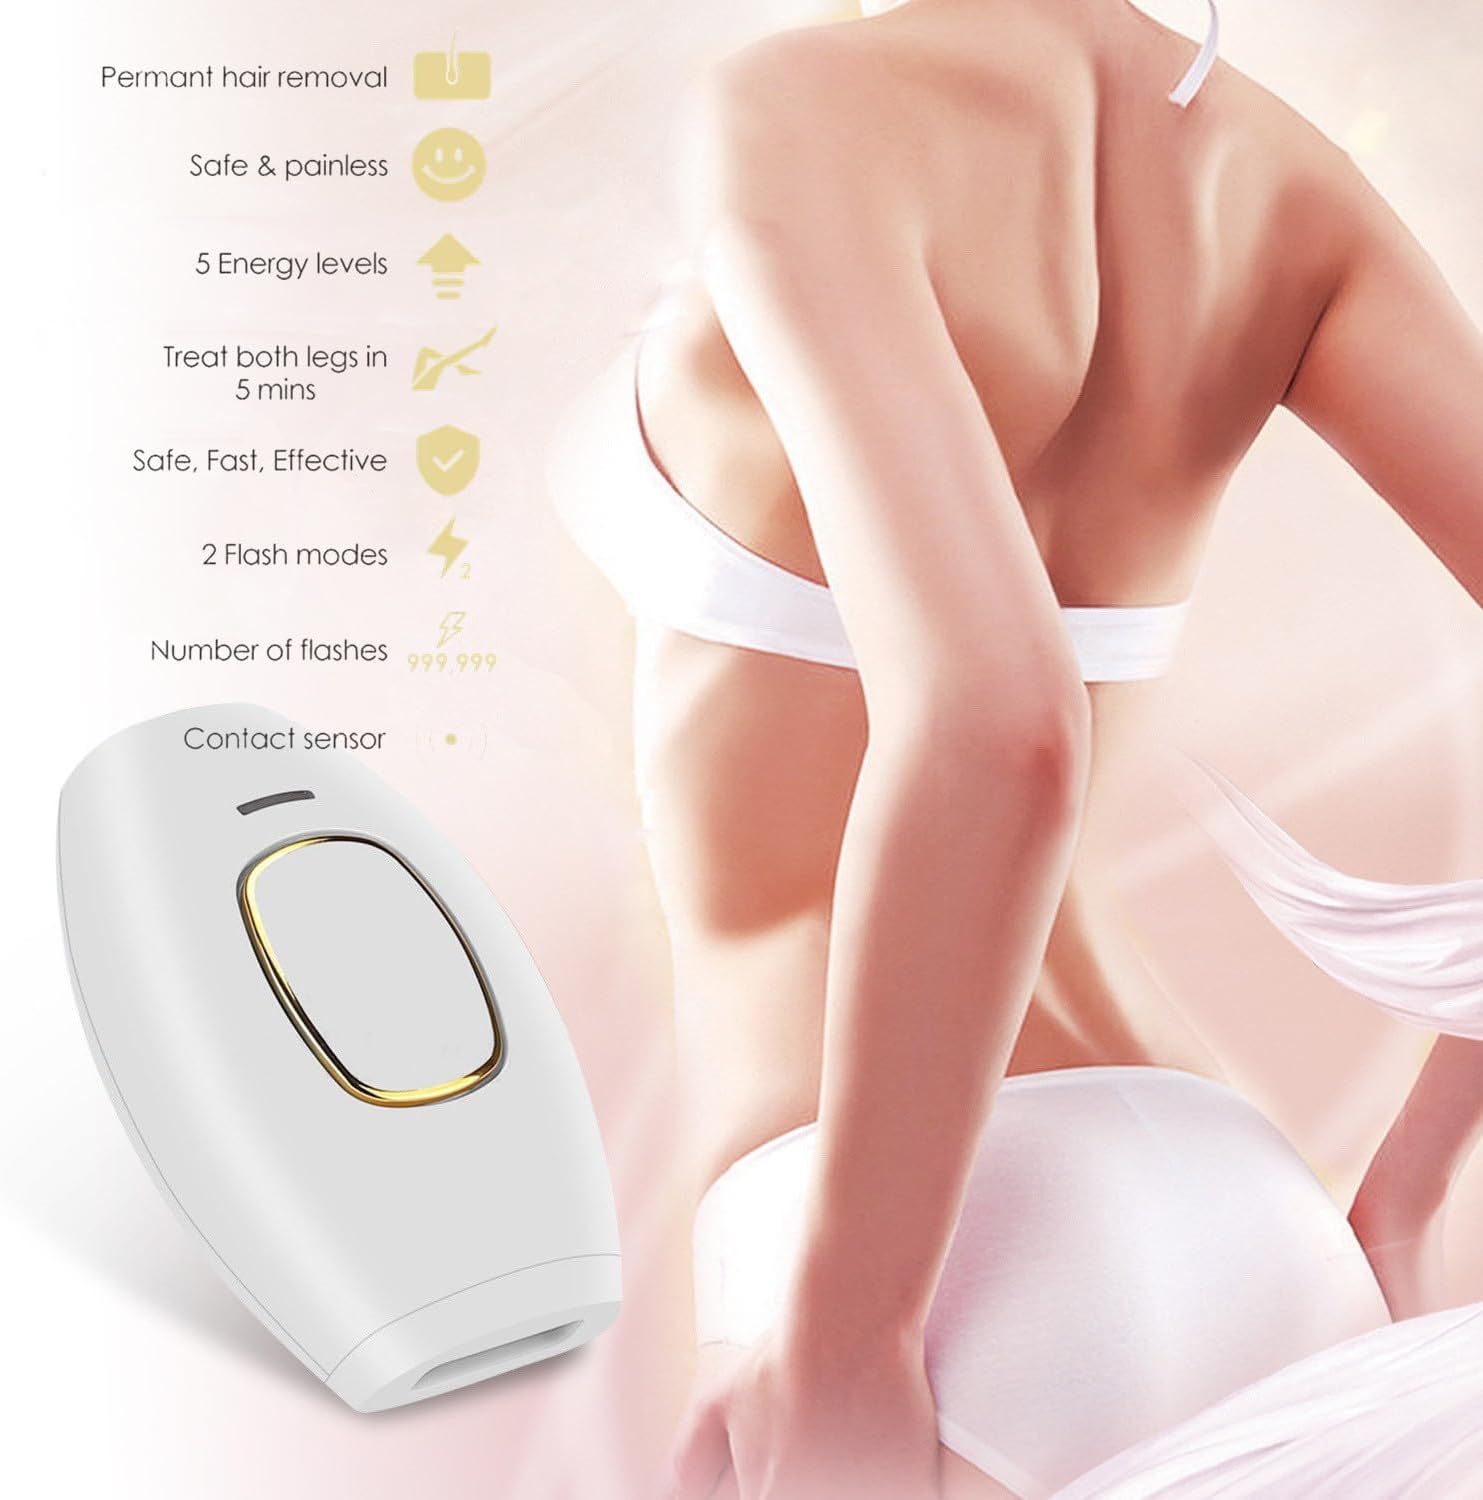 Desnisa - Hair laser Removal Device